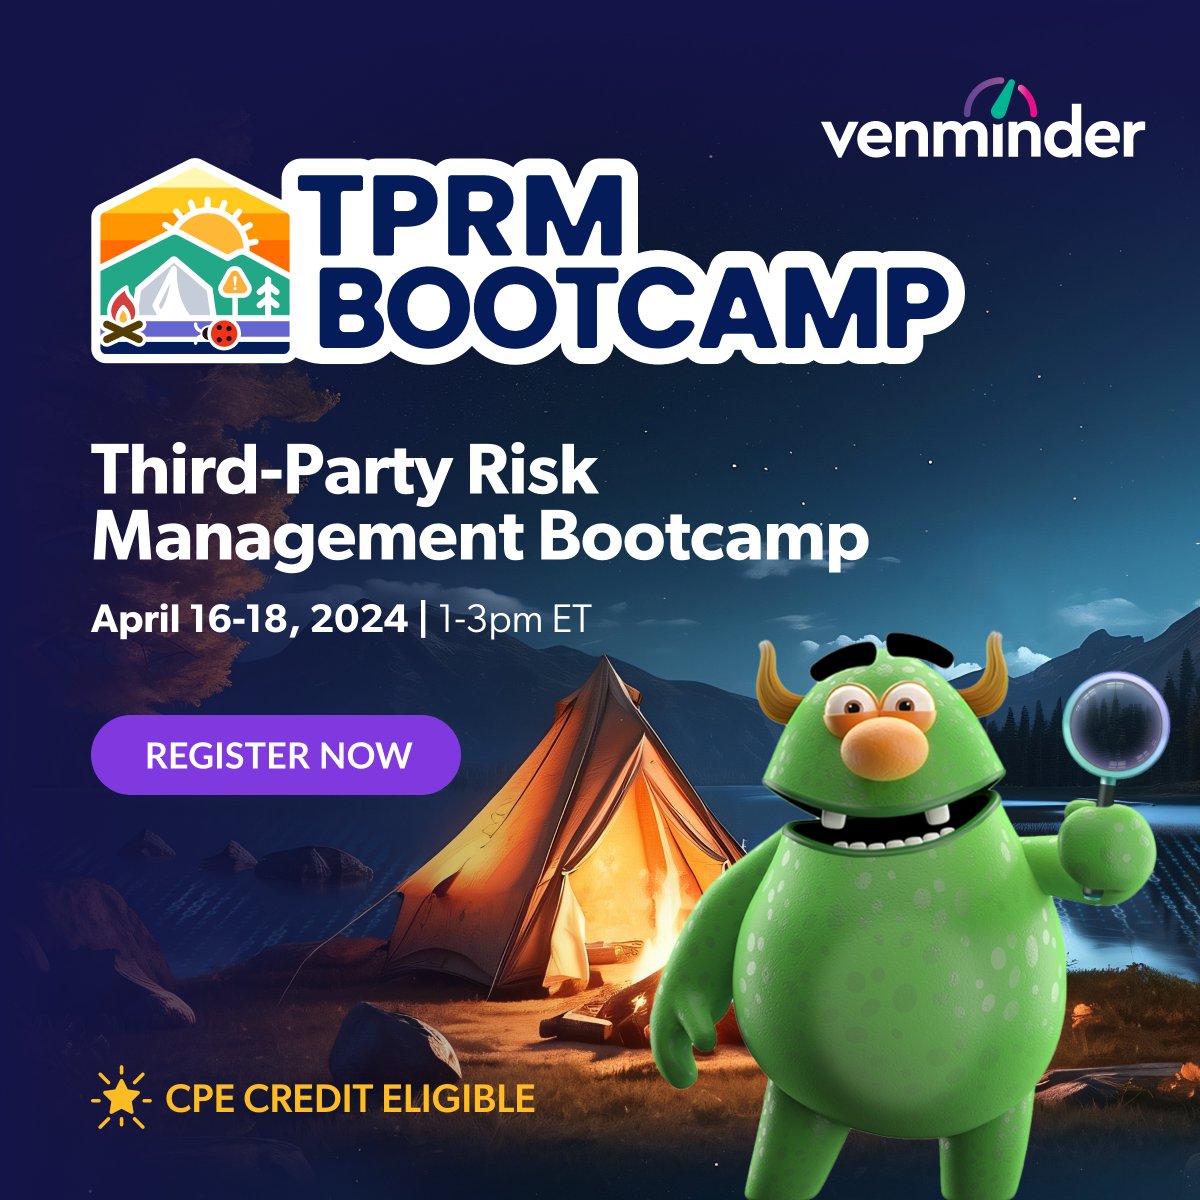 Day ☝️ of our virtual #TPRM Bootcamp is about to commence! Join us at 1pm ET to learn about criticality and risk ratings, steps to implement a risk-based vendor #duediligence strategy, treating critical vendor contracts differently, and more: hubs.ly/Q02t0tnn0 #vendorrisk